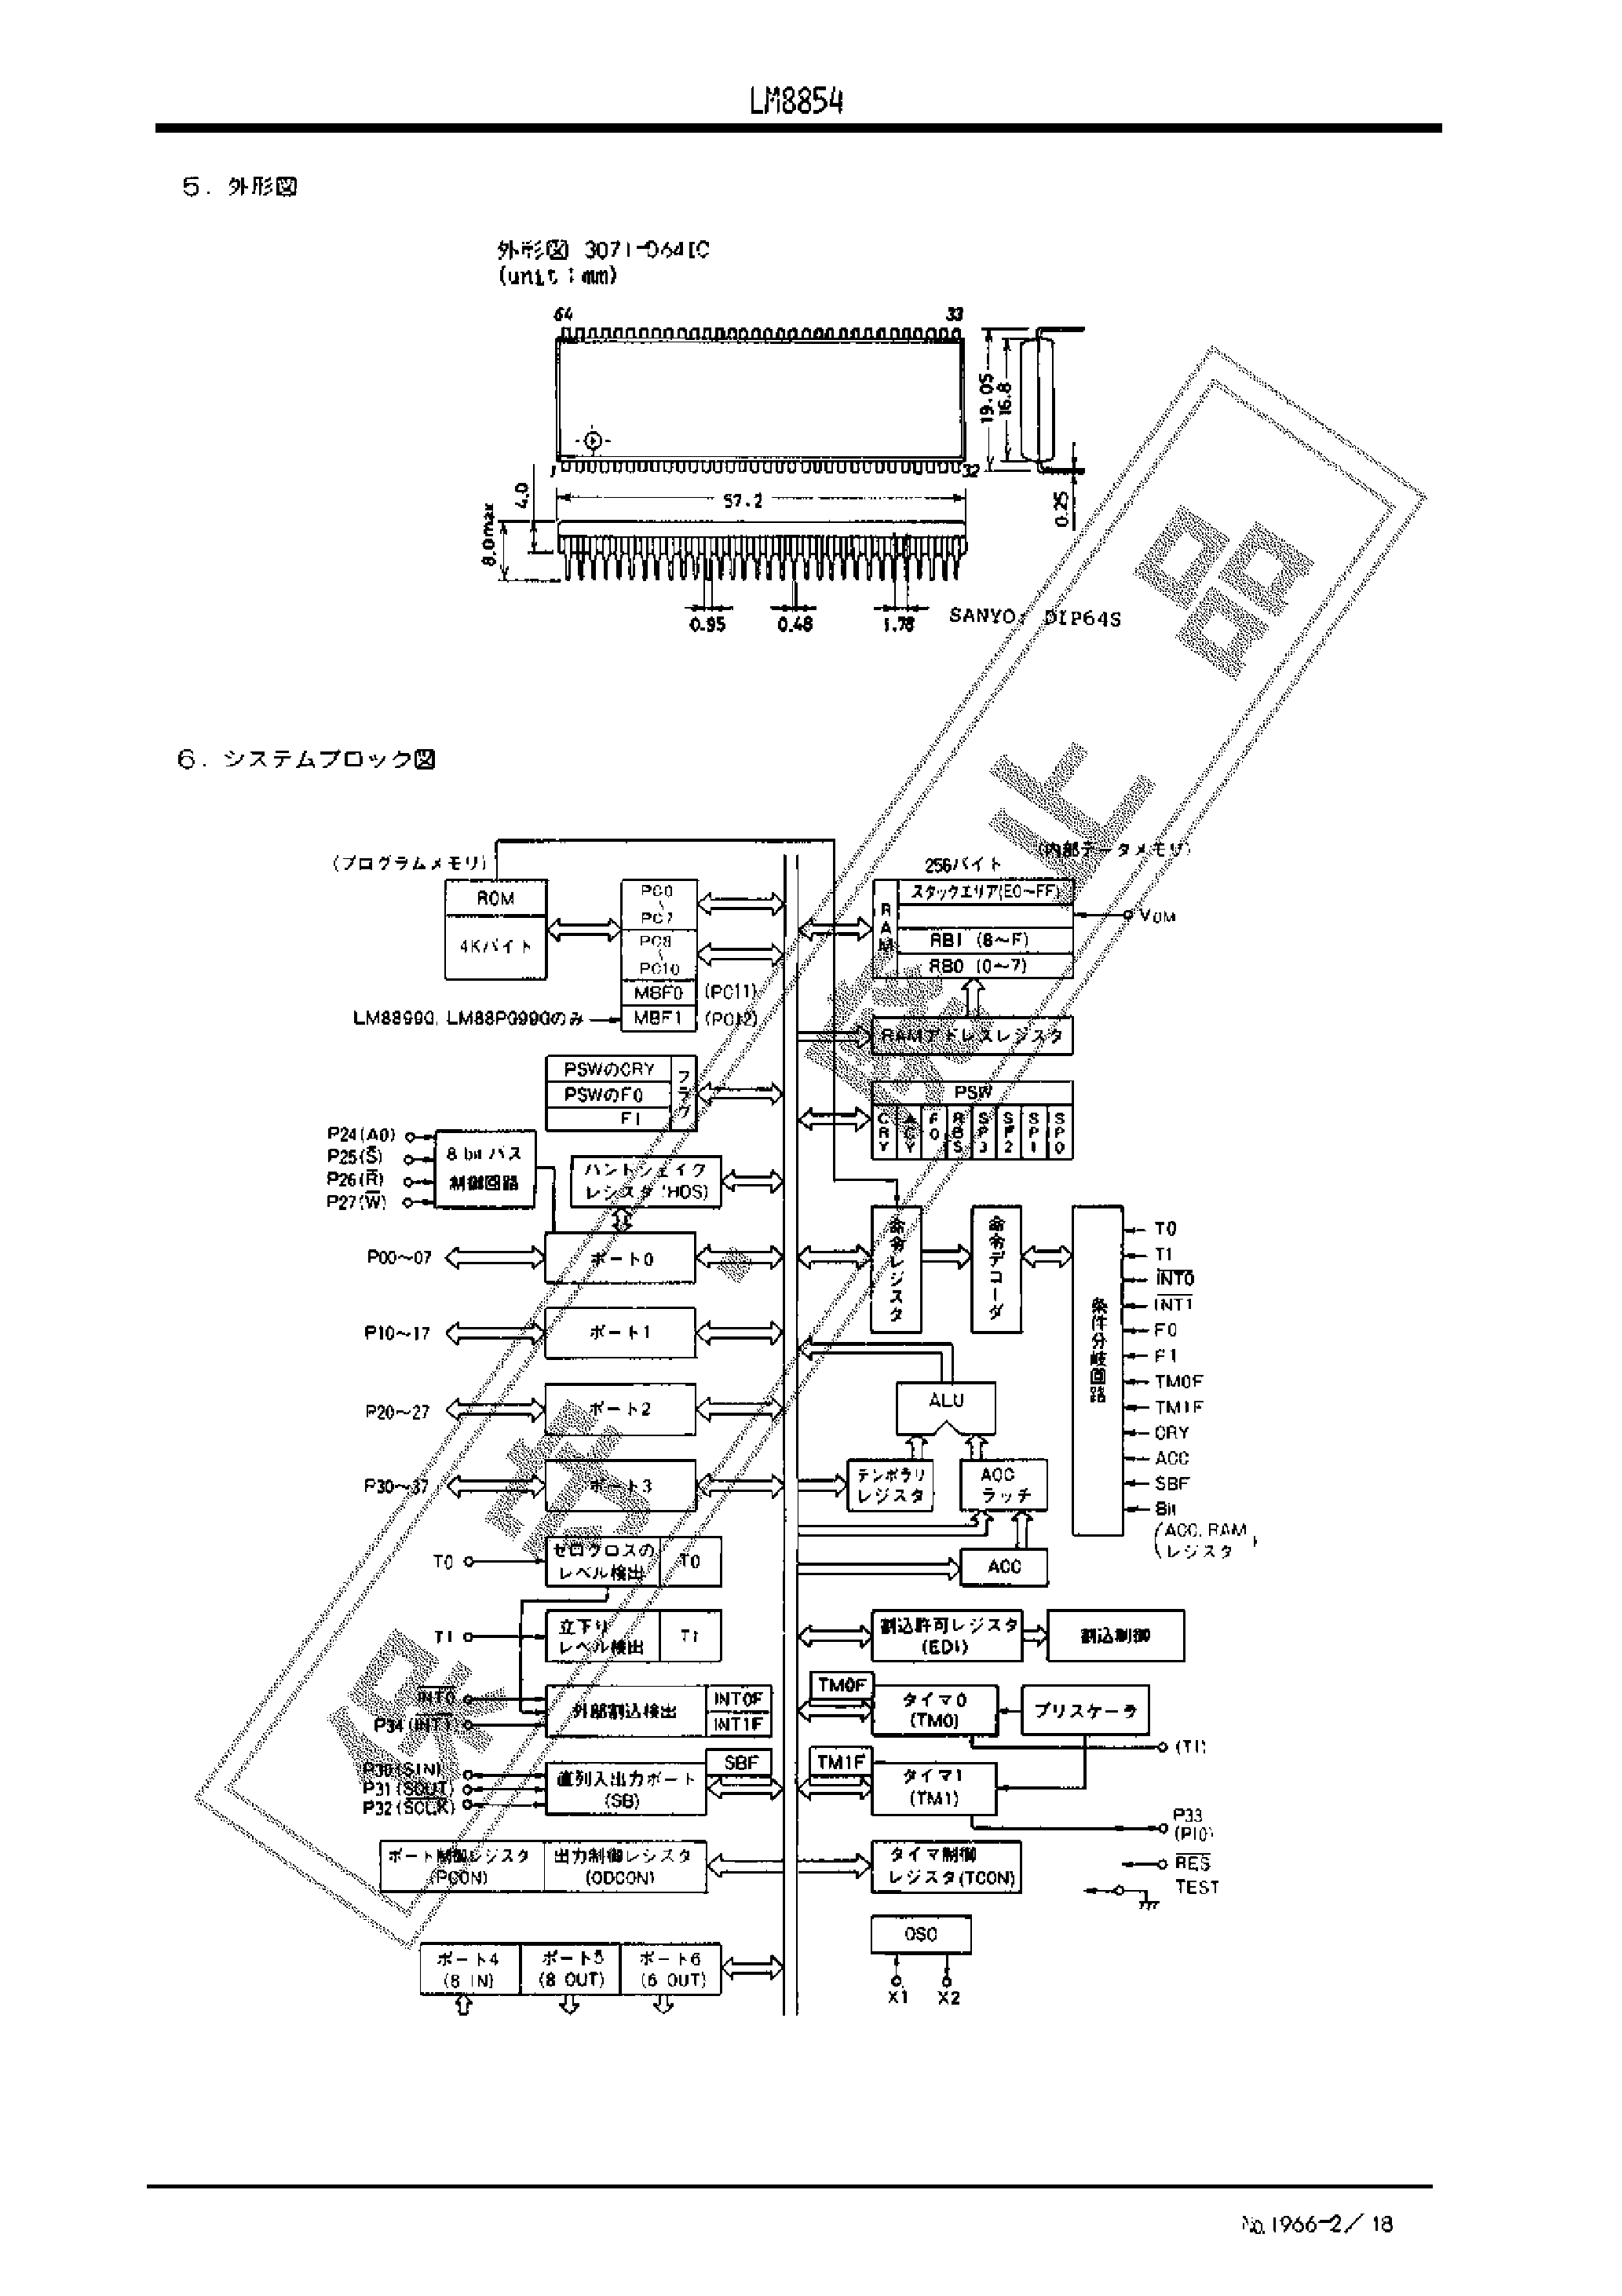 Datasheet LM8854 - E/D MOS LSI page 2